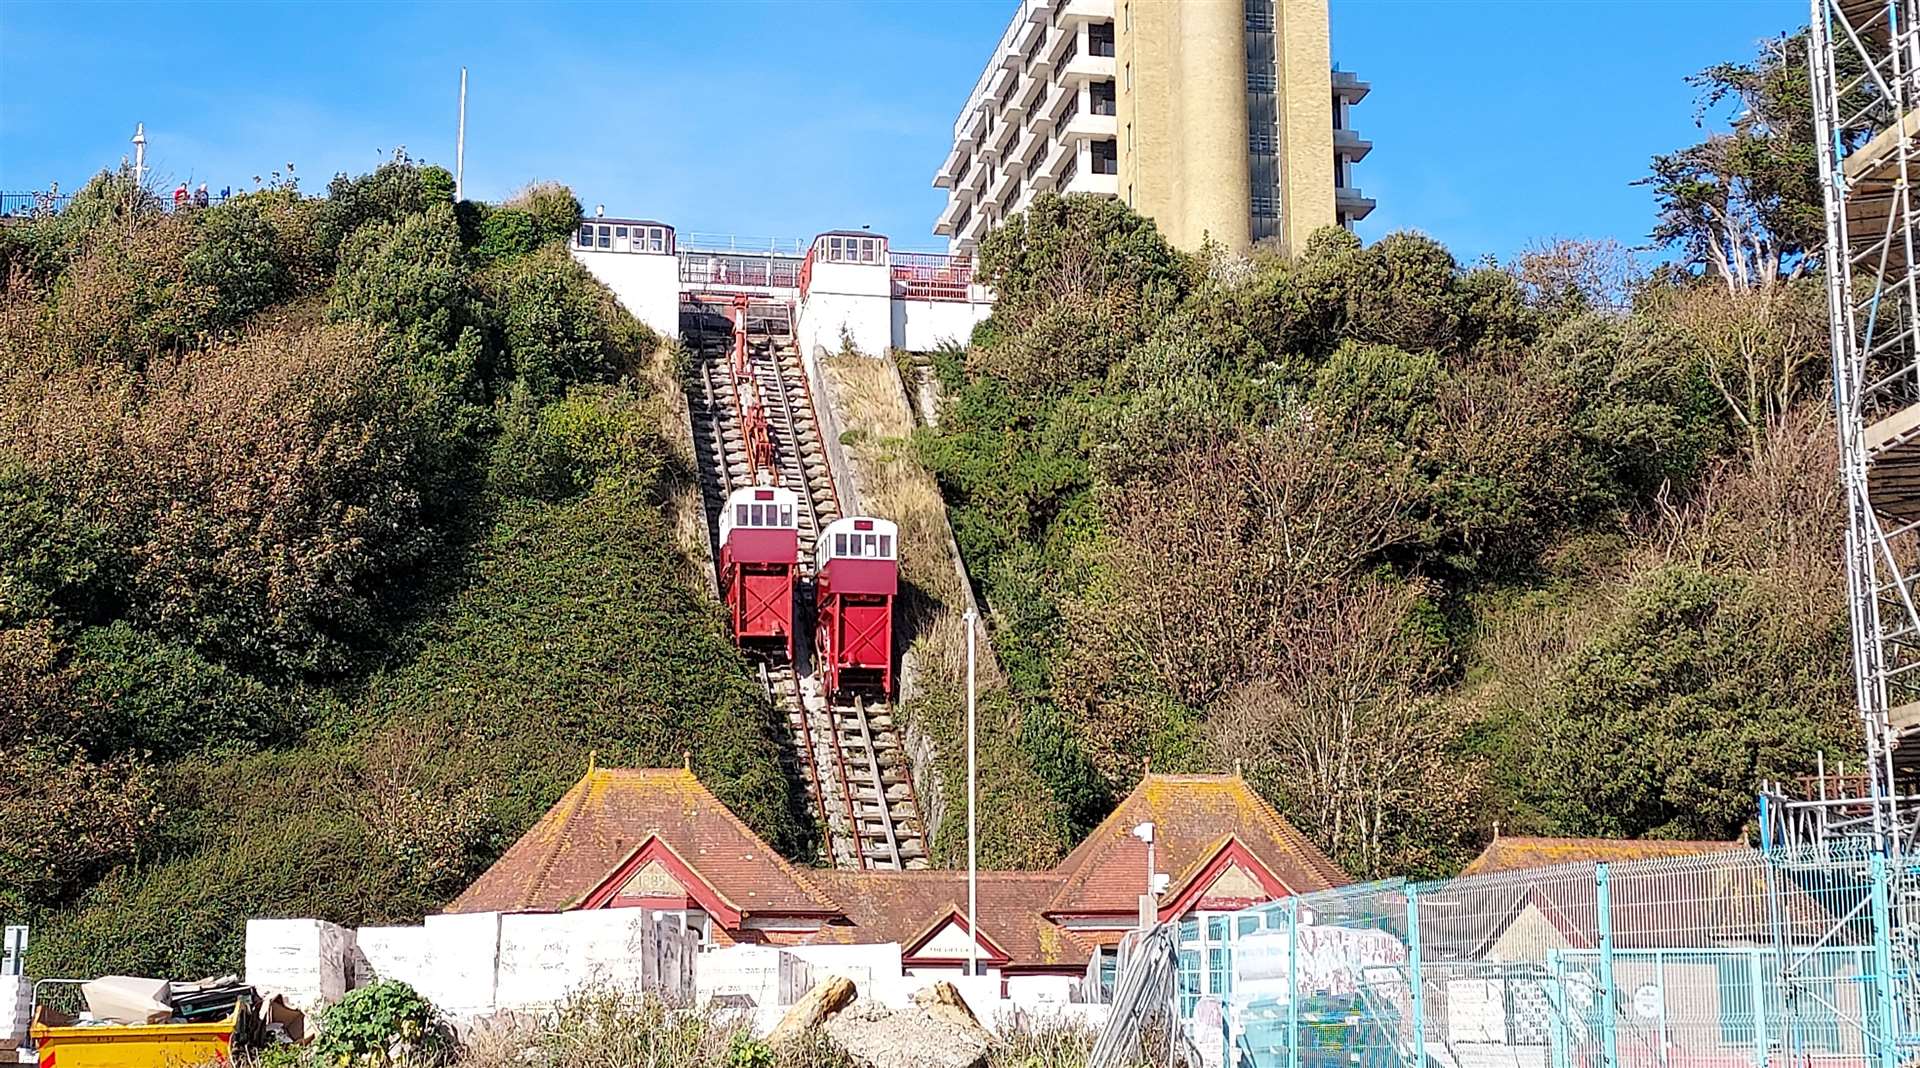 The Leas Lift funicular railway on the cliff between the Leas and the seafront in Folkestone